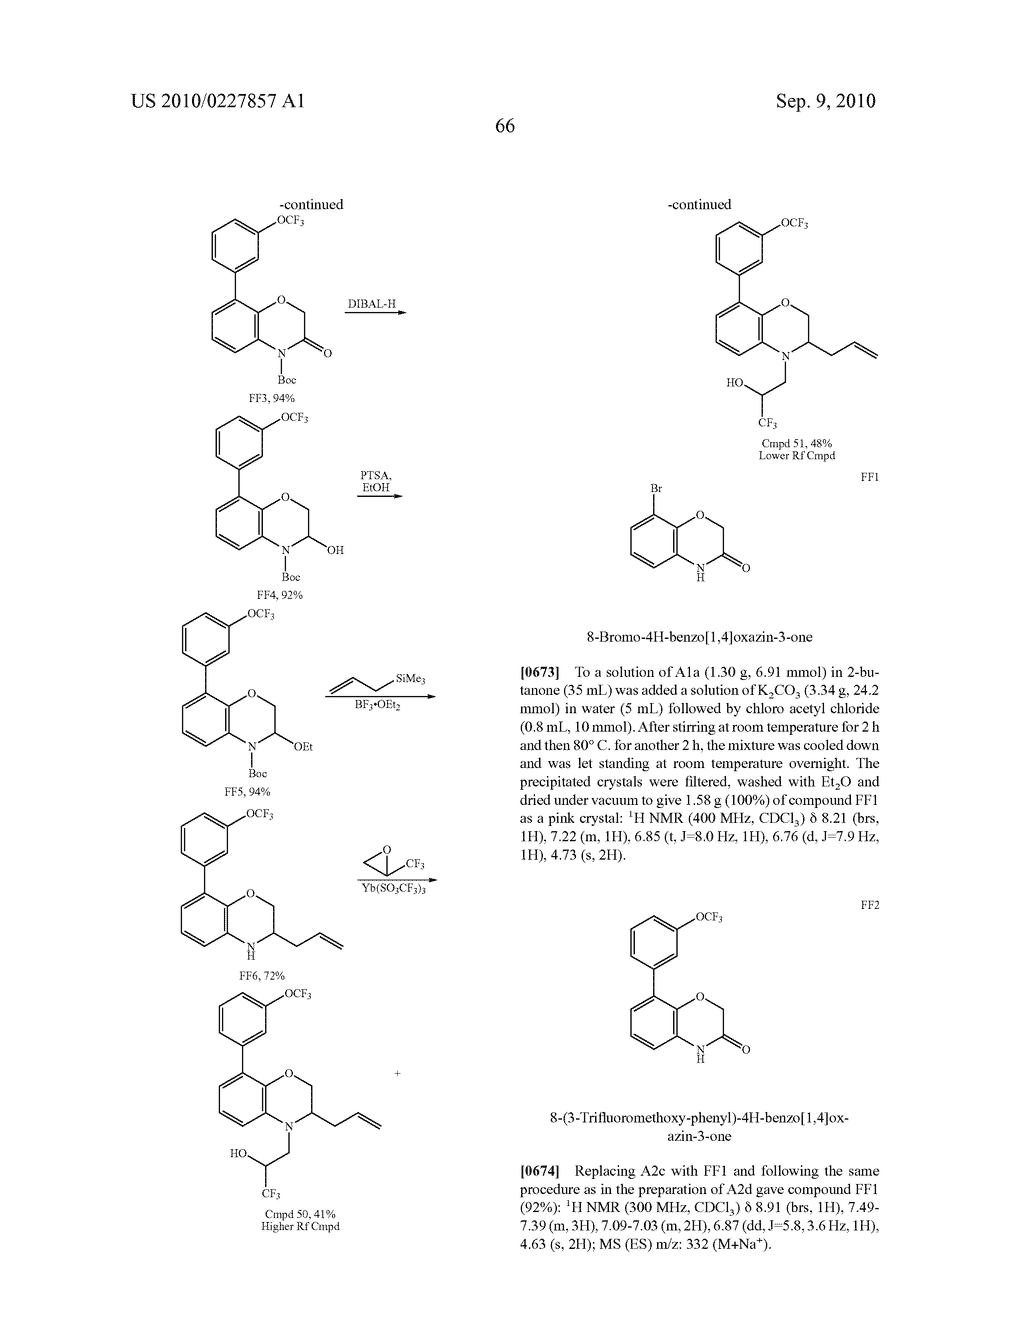 3,4-DIHYDRO-2H-BENZO[1,4]OXAZINE AND THIAZINE DERIVATIVES AS CETP INHIBITORS - diagram, schematic, and image 67